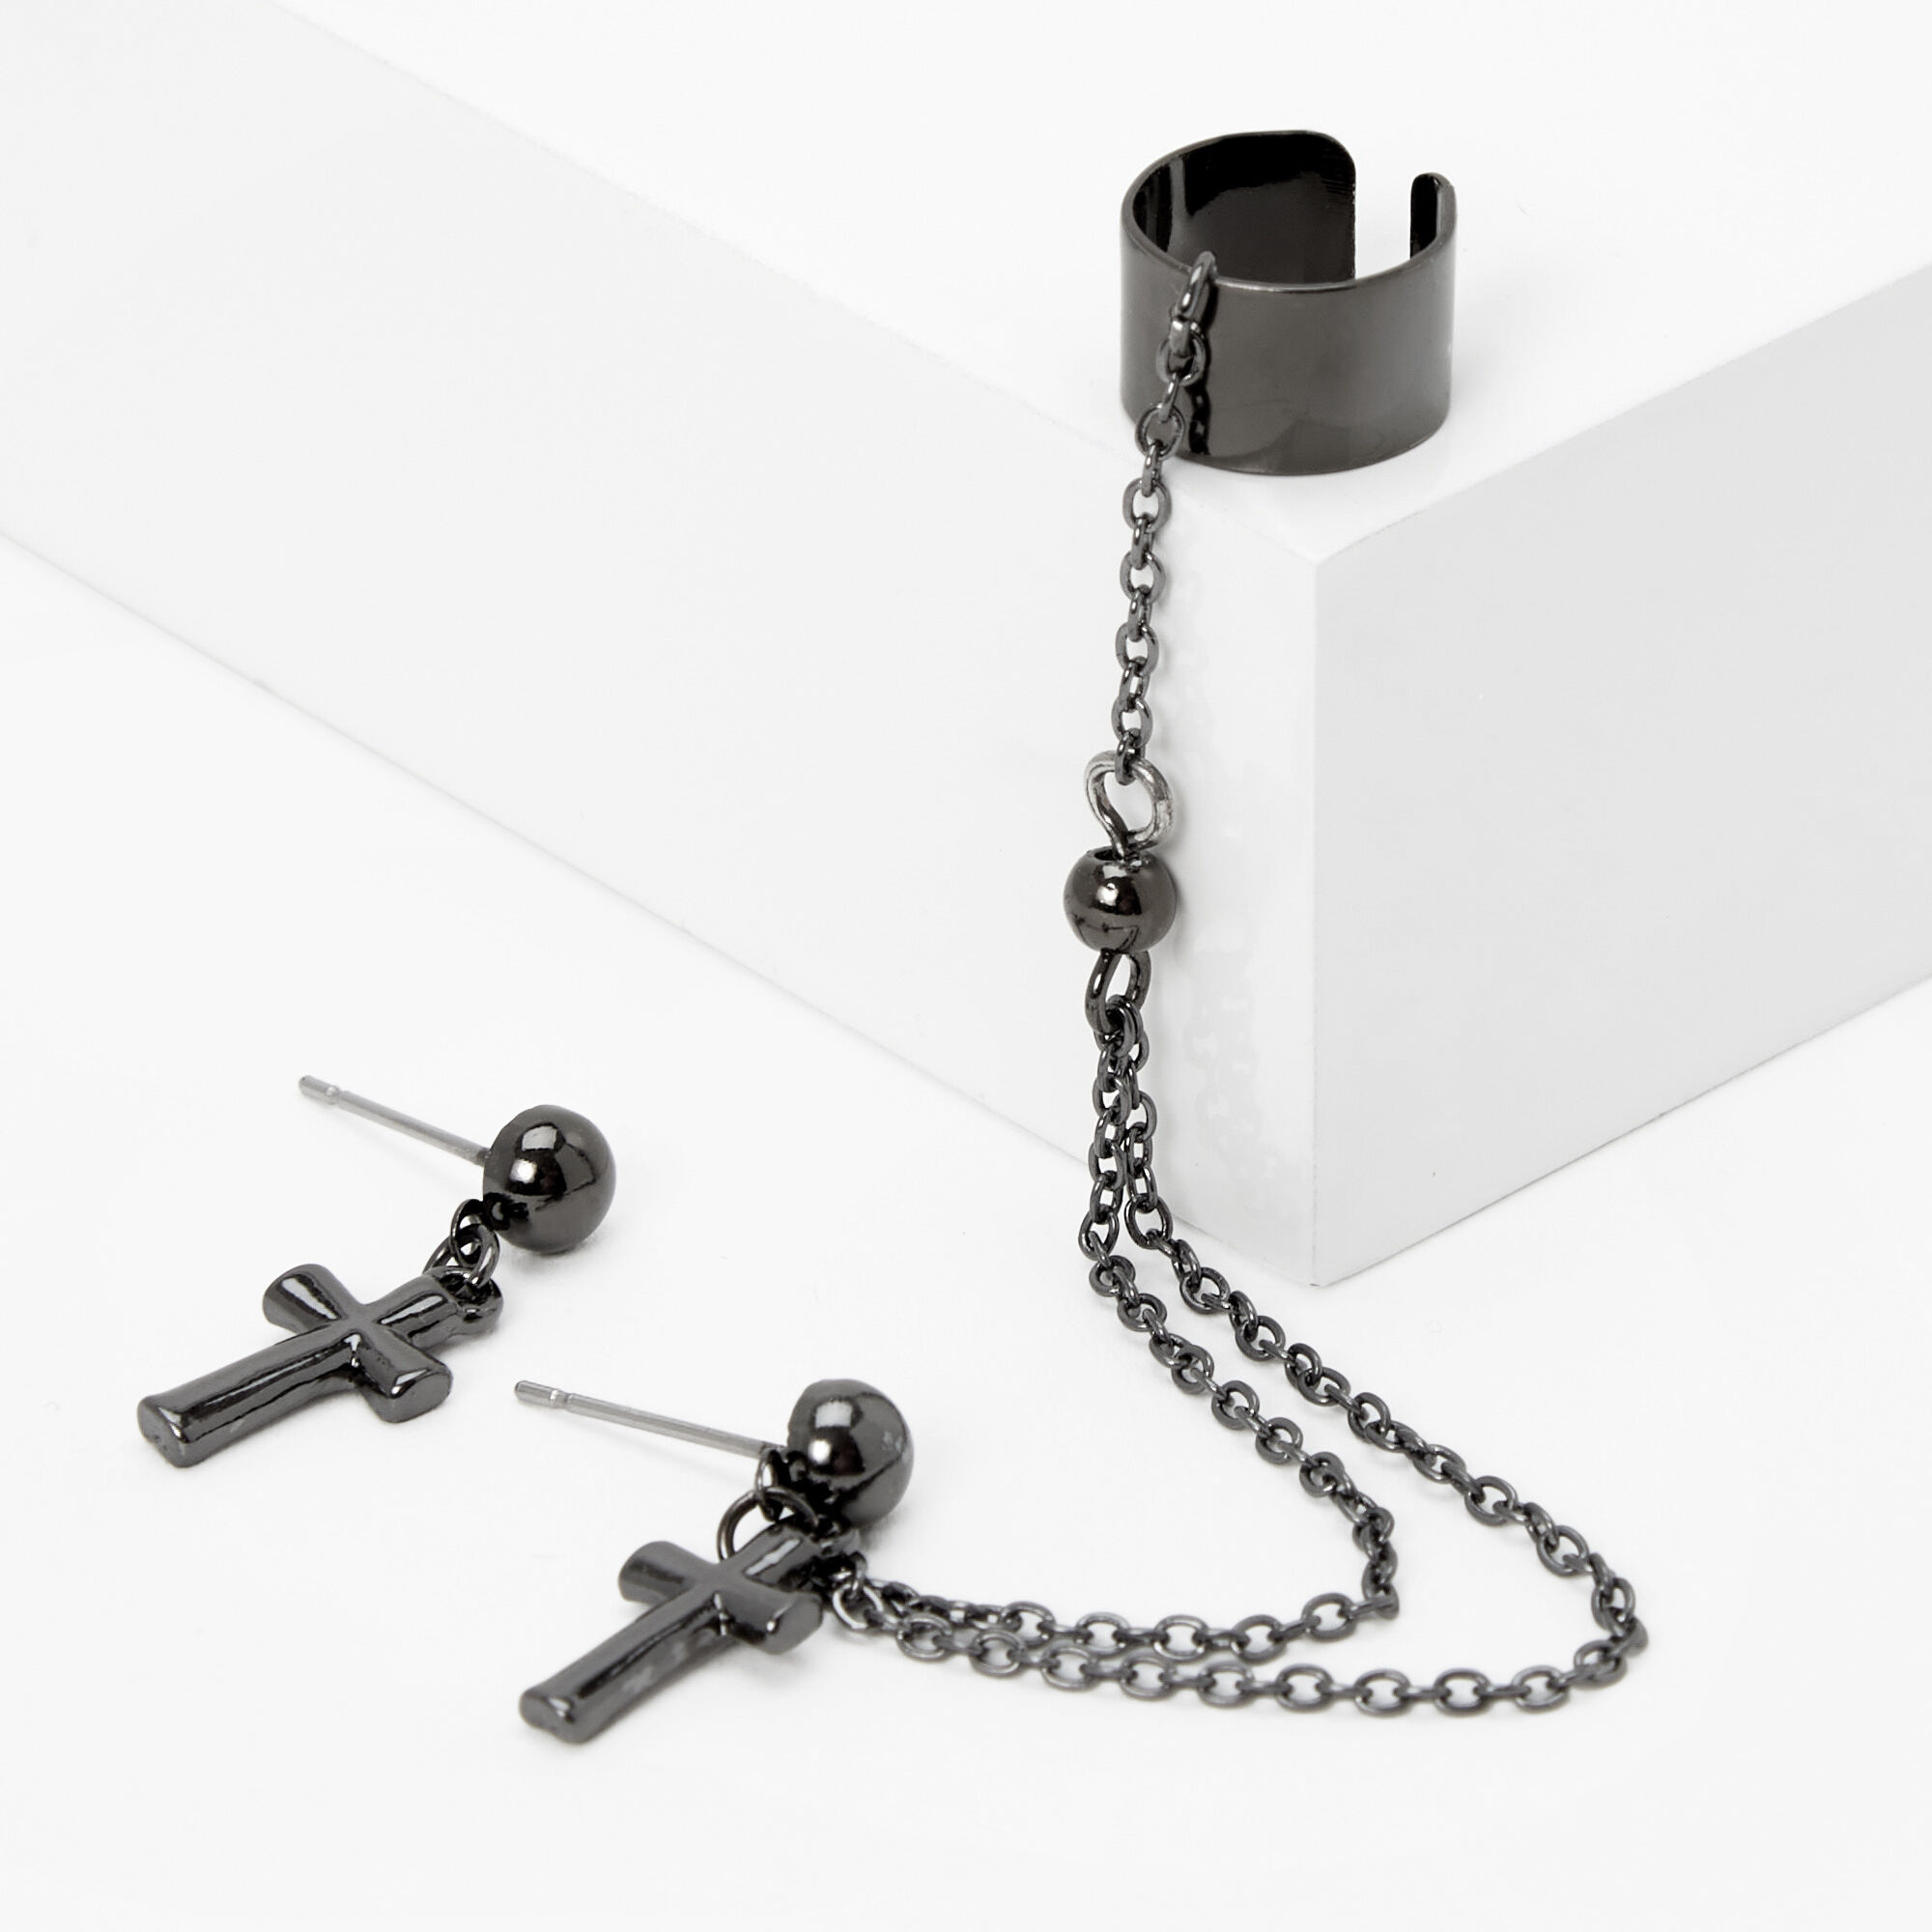 View Claires Hematite Cross Cuff Connector Earrings information